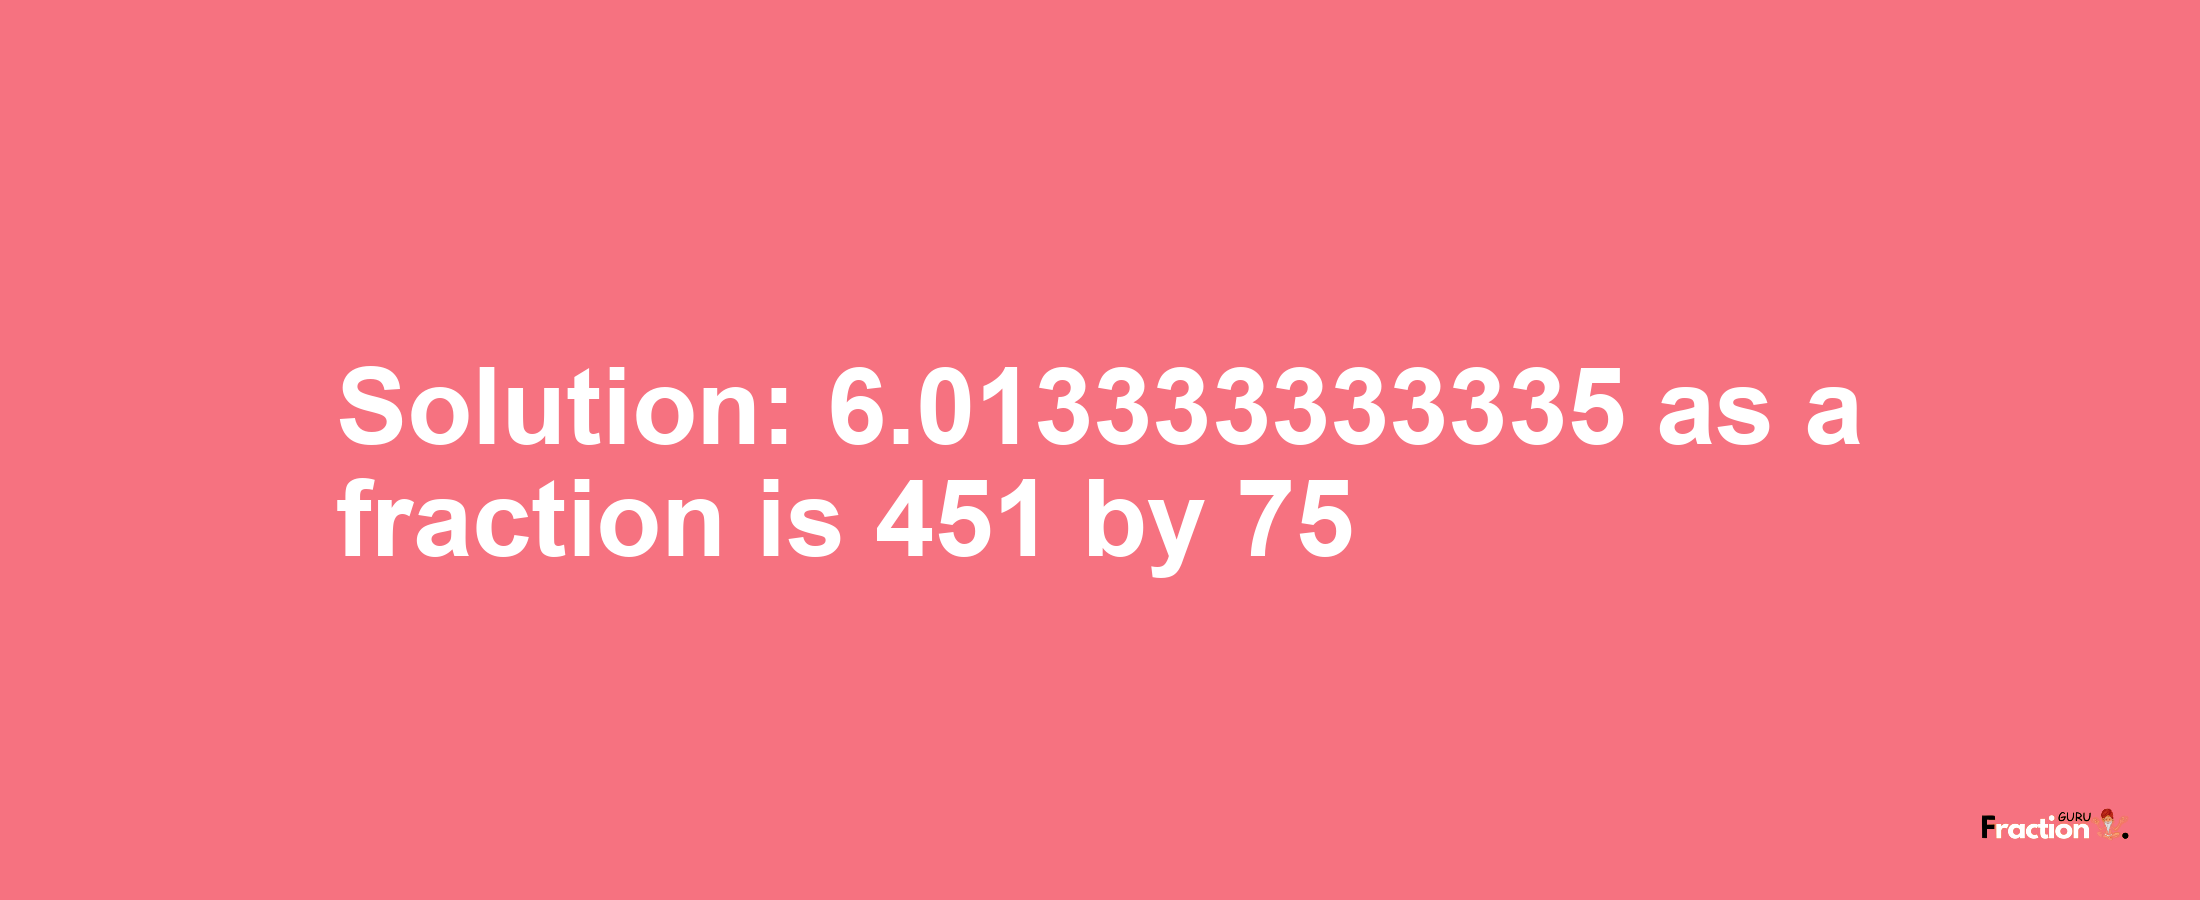 Solution:6.013333333335 as a fraction is 451/75